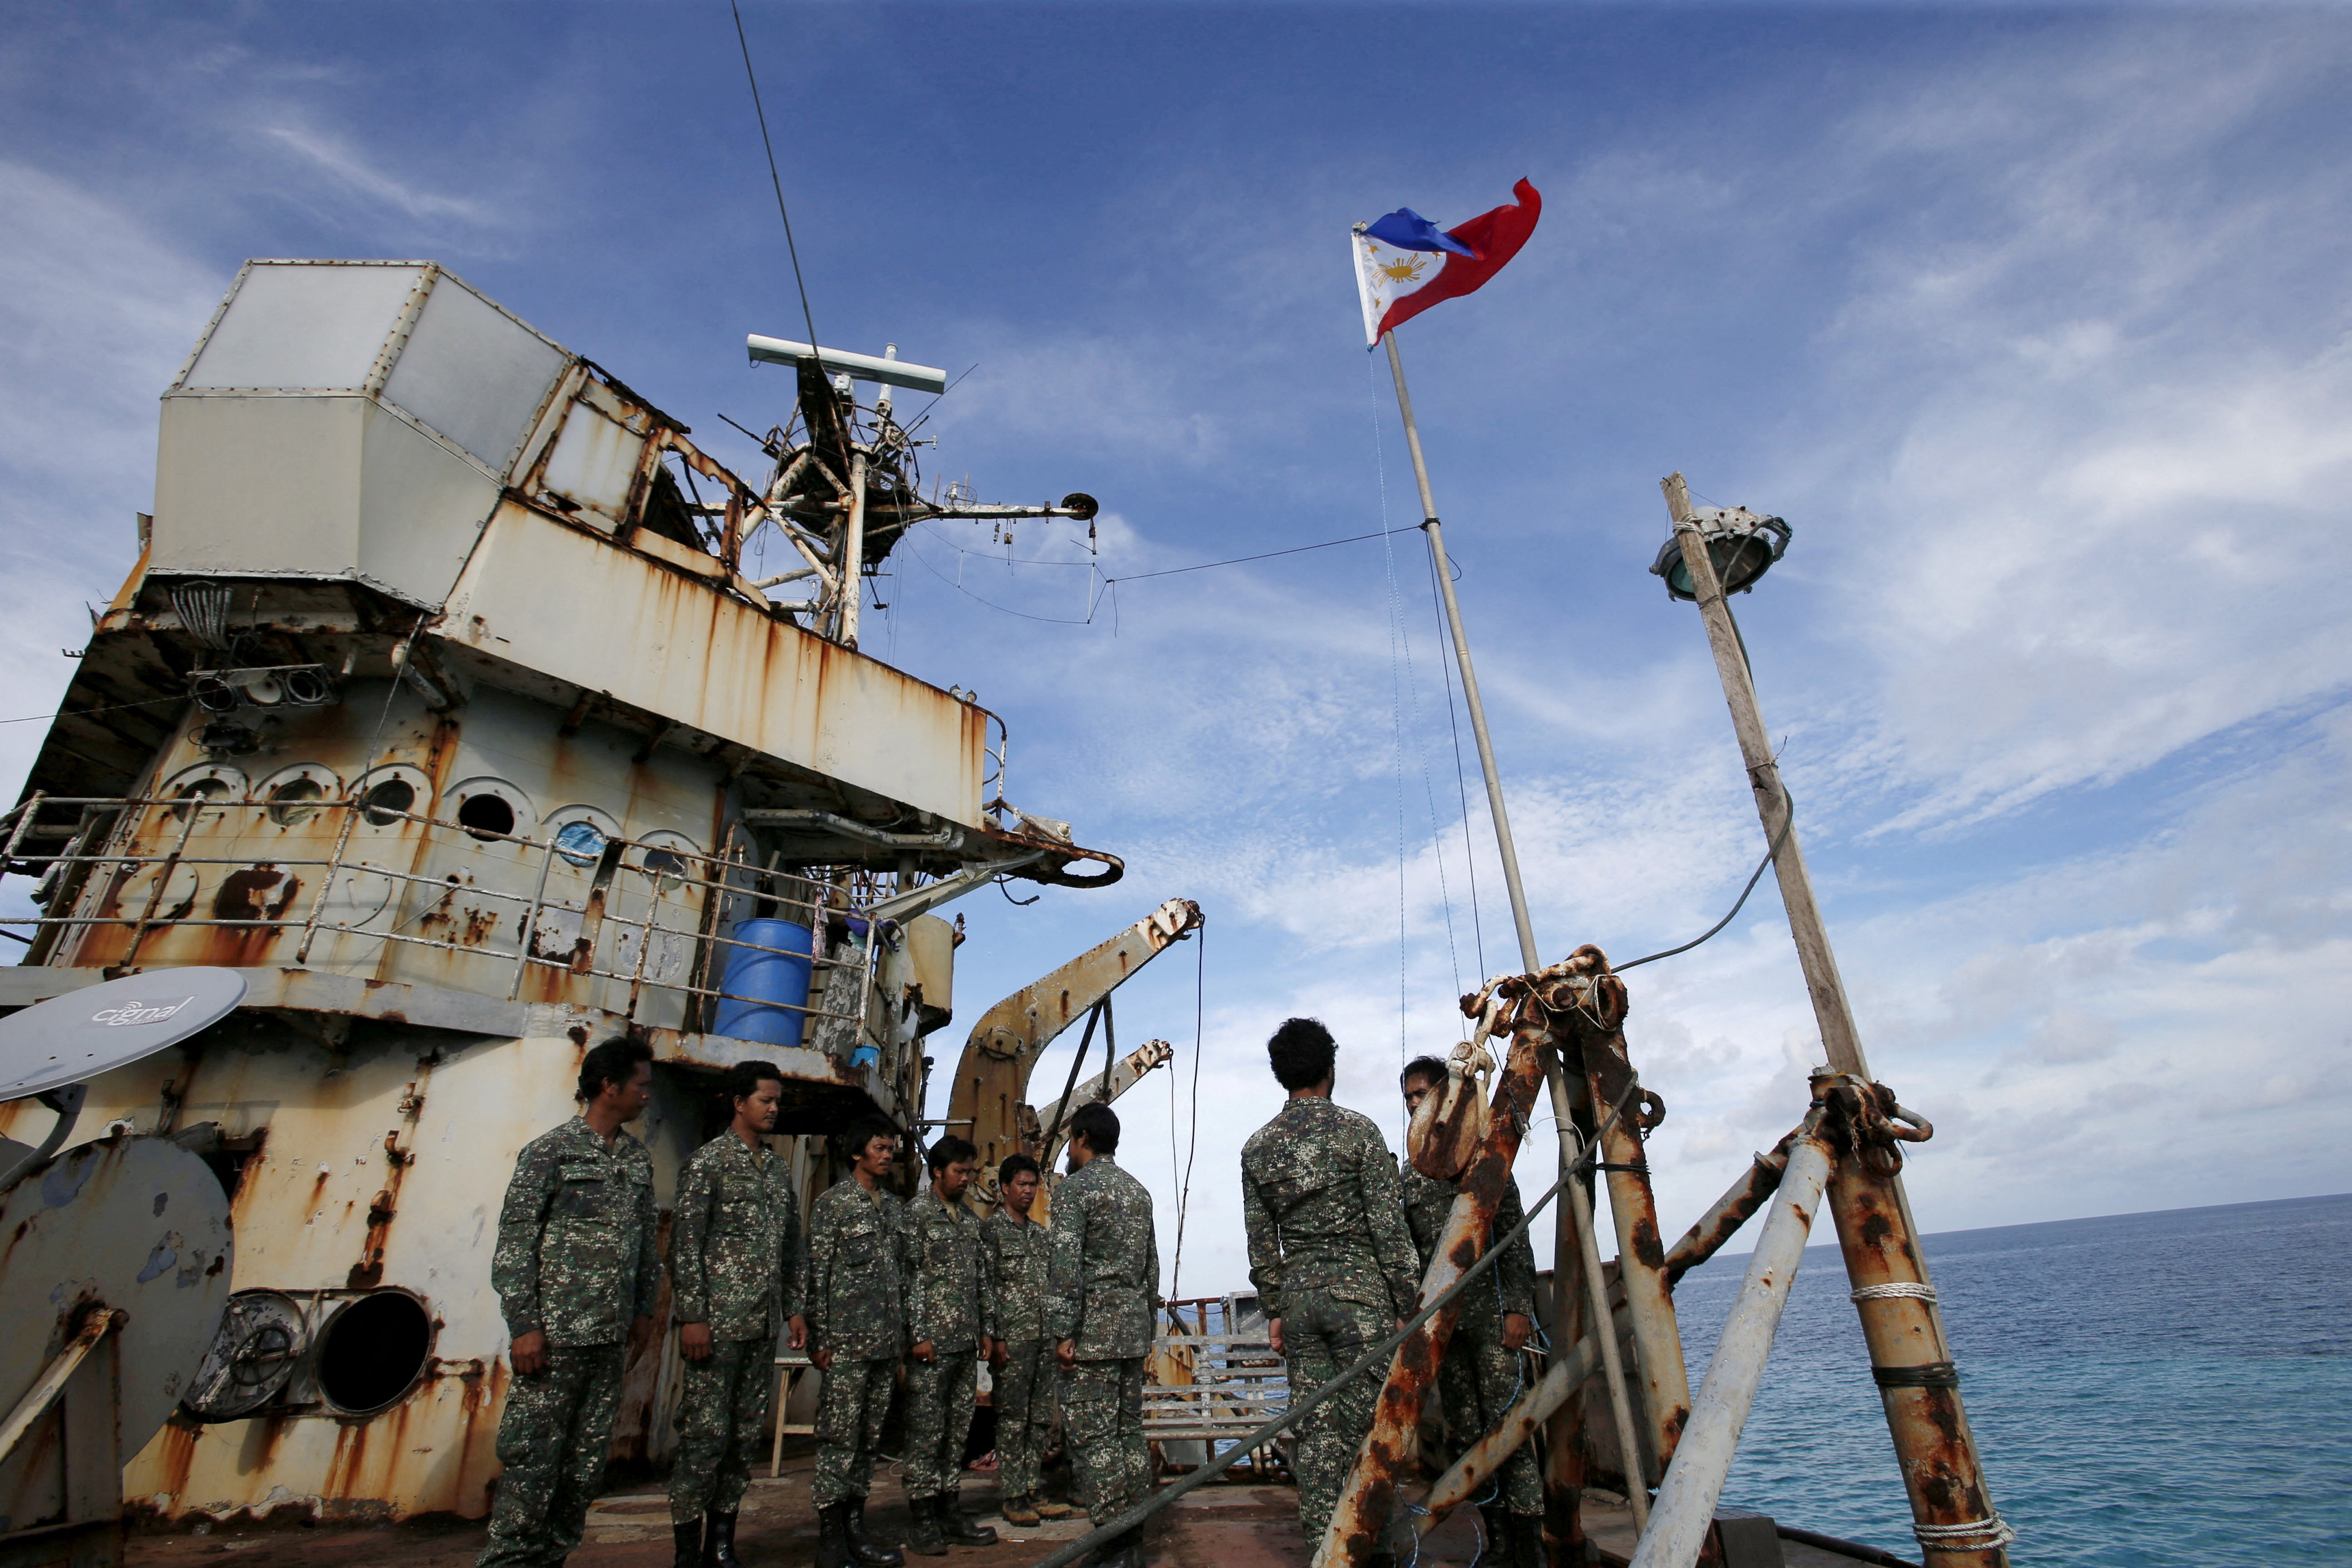 Philippine Marines on the BRP Sierra Madre, a dilapidated Navy ship that has been aground since 1999 and became a military detachment on the disputed Second Thomas Shoal, part of the Spratly Islands, in the South China Sea March. Photo: Reuters